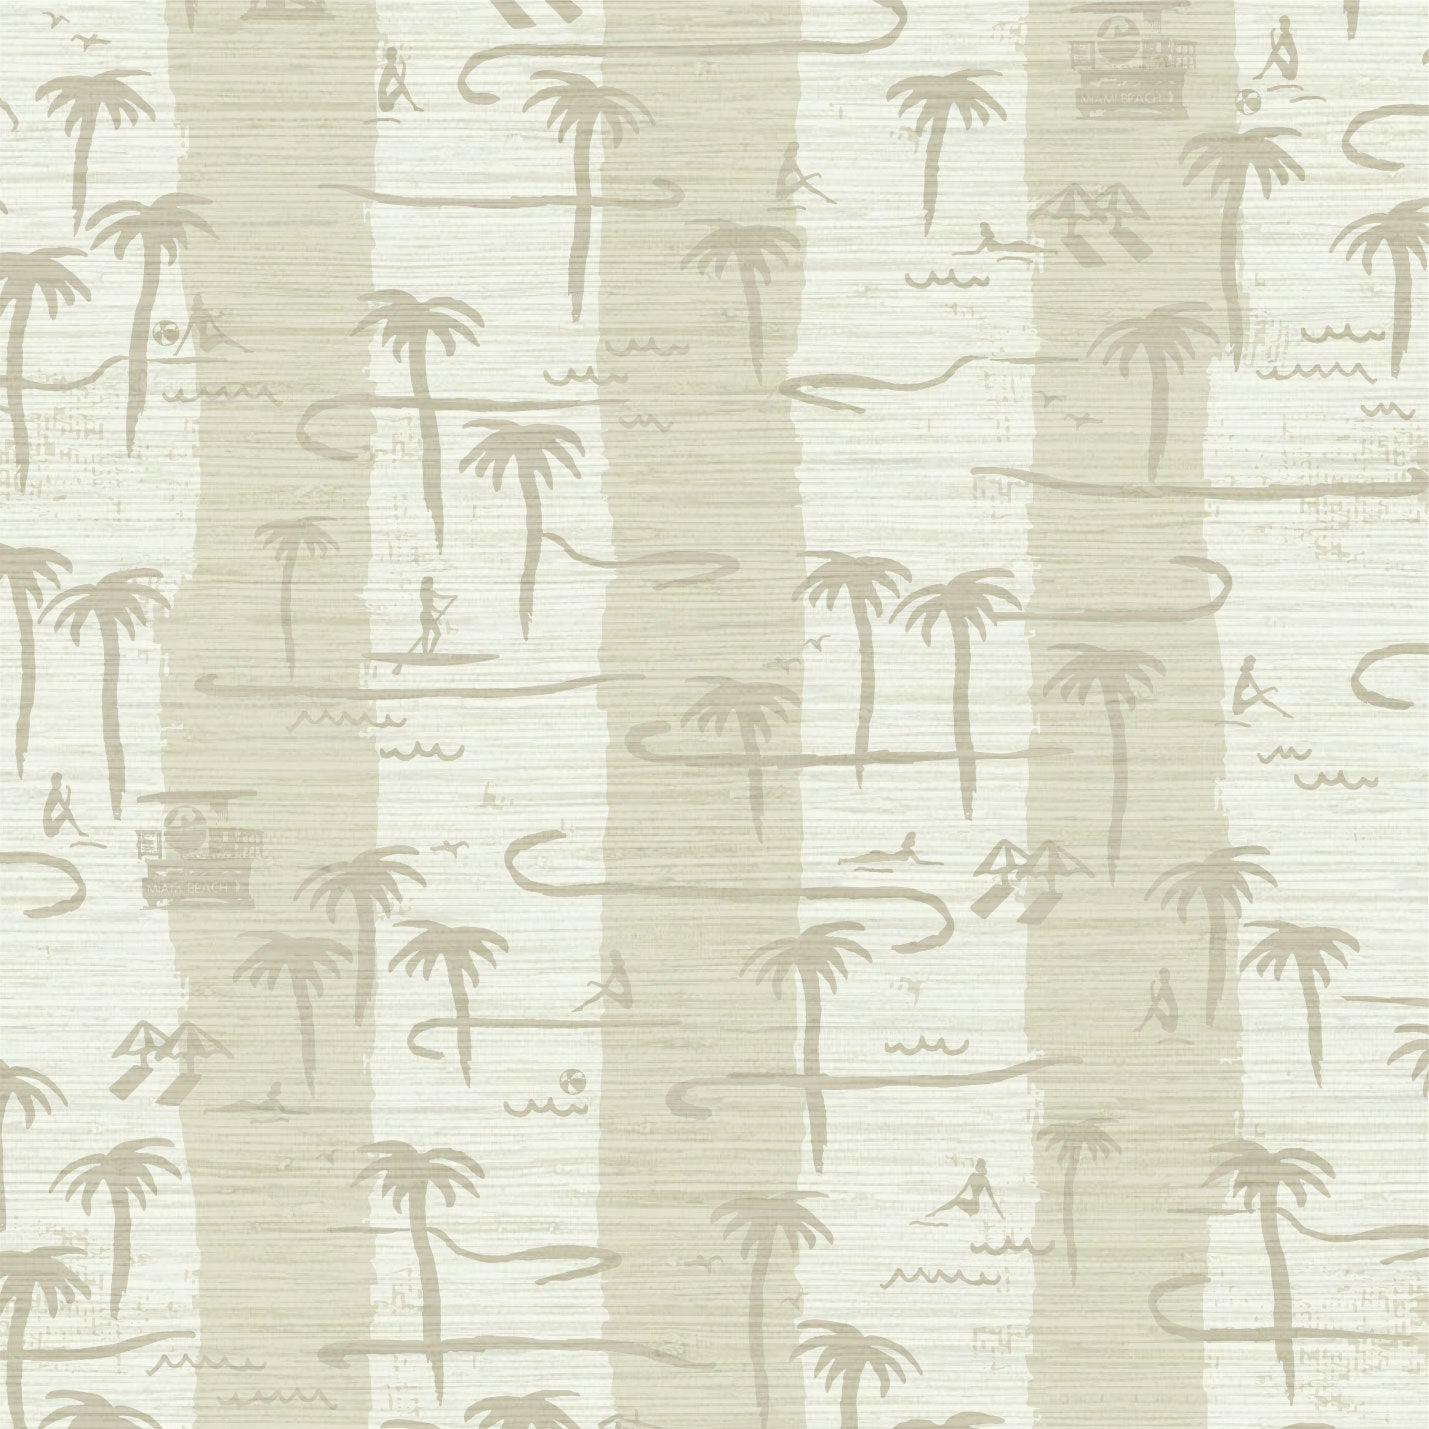 Load image into Gallery viewer, two color vertical stripe beach print featuring palm trees, beachgoers, lifeguard stands and ocean waves Grasscloth Natural Textured Eco-Friendly Non-toxic High-quality  Sustainable practices Sustainability Interior Design Wall covering Bold Wallpaper Custom Tailor-made Retro chic Tropical  Seaside Coastal Seashore Waterfront Vacation home styling Retreat Relaxed beach vibes Beach cottage Shoreline Oceanfront Nautical white tan sand cream offwhite sand
